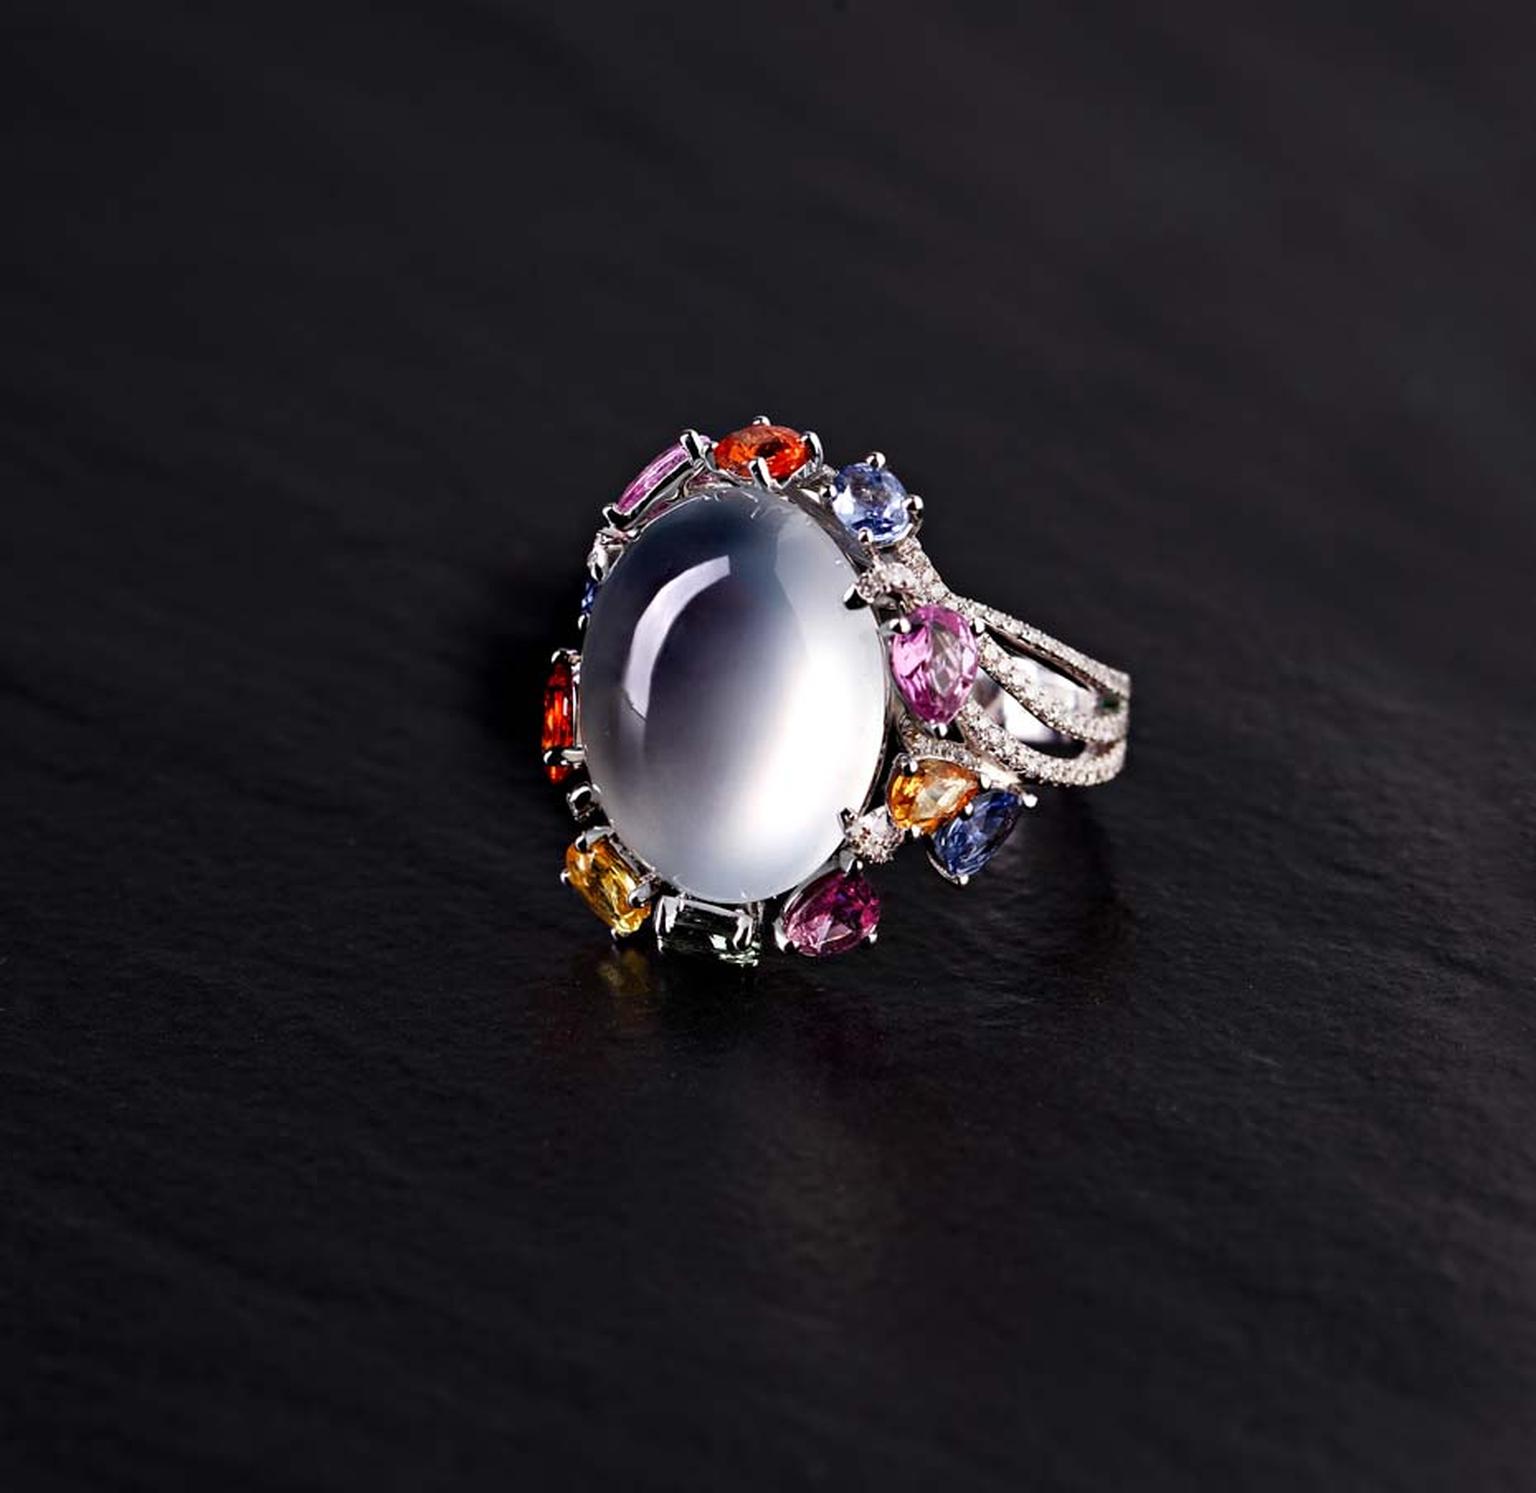 Zhaoyi is renowned for its use of colourless jade in its jewellery designs, such as this icy jadeite ring with diamonds and coloured gemstones.